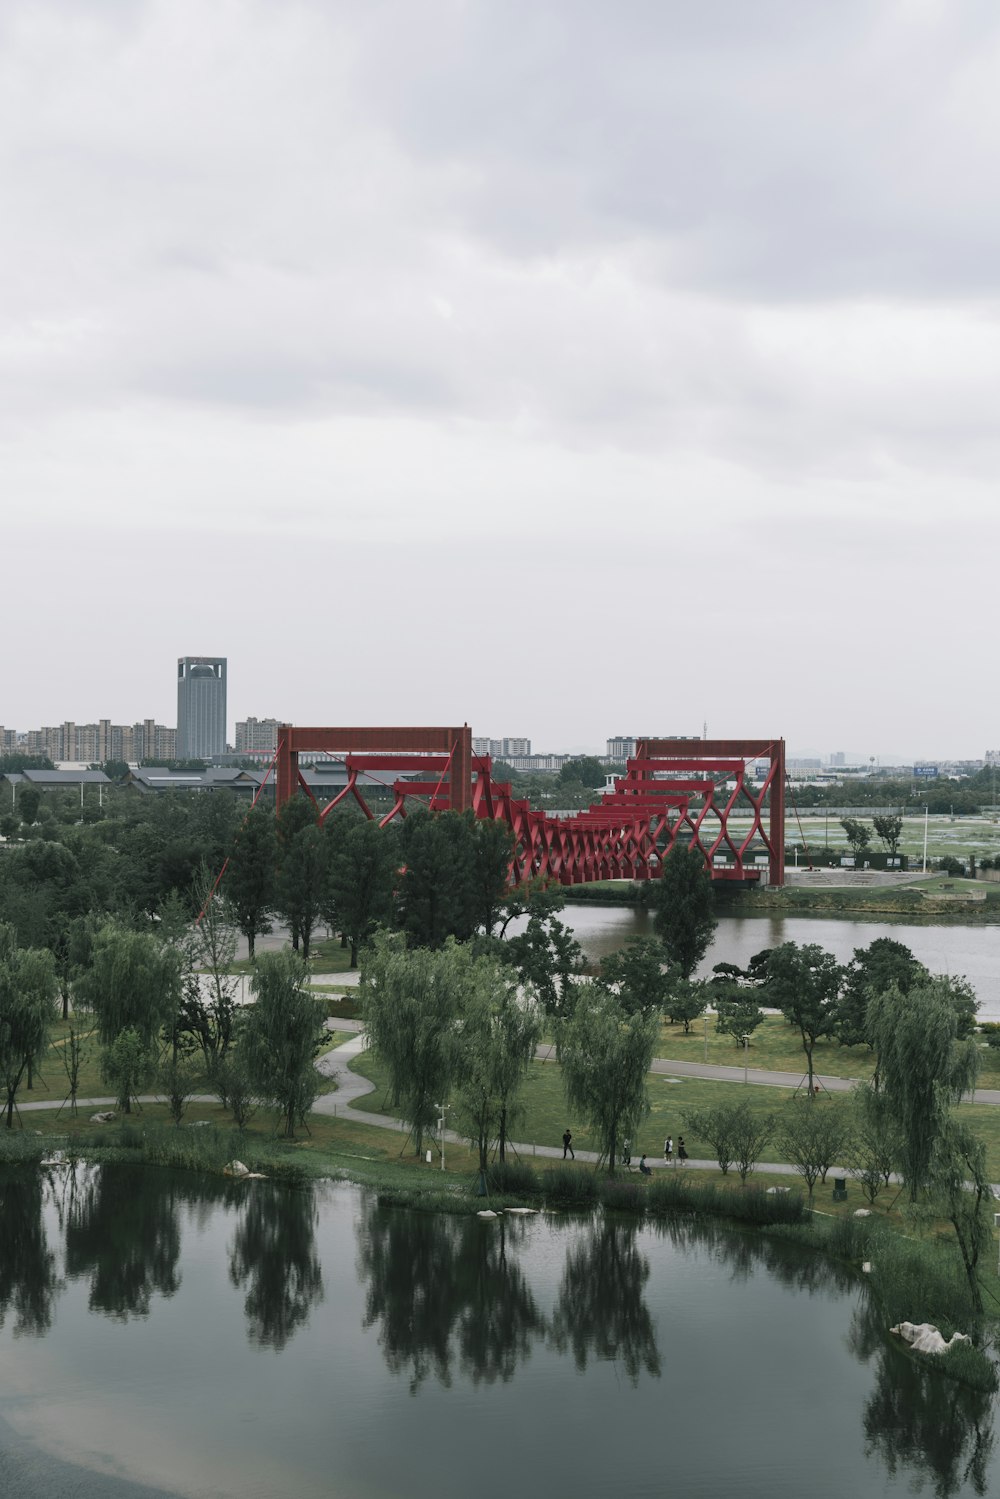 a large red bridge over a body of water